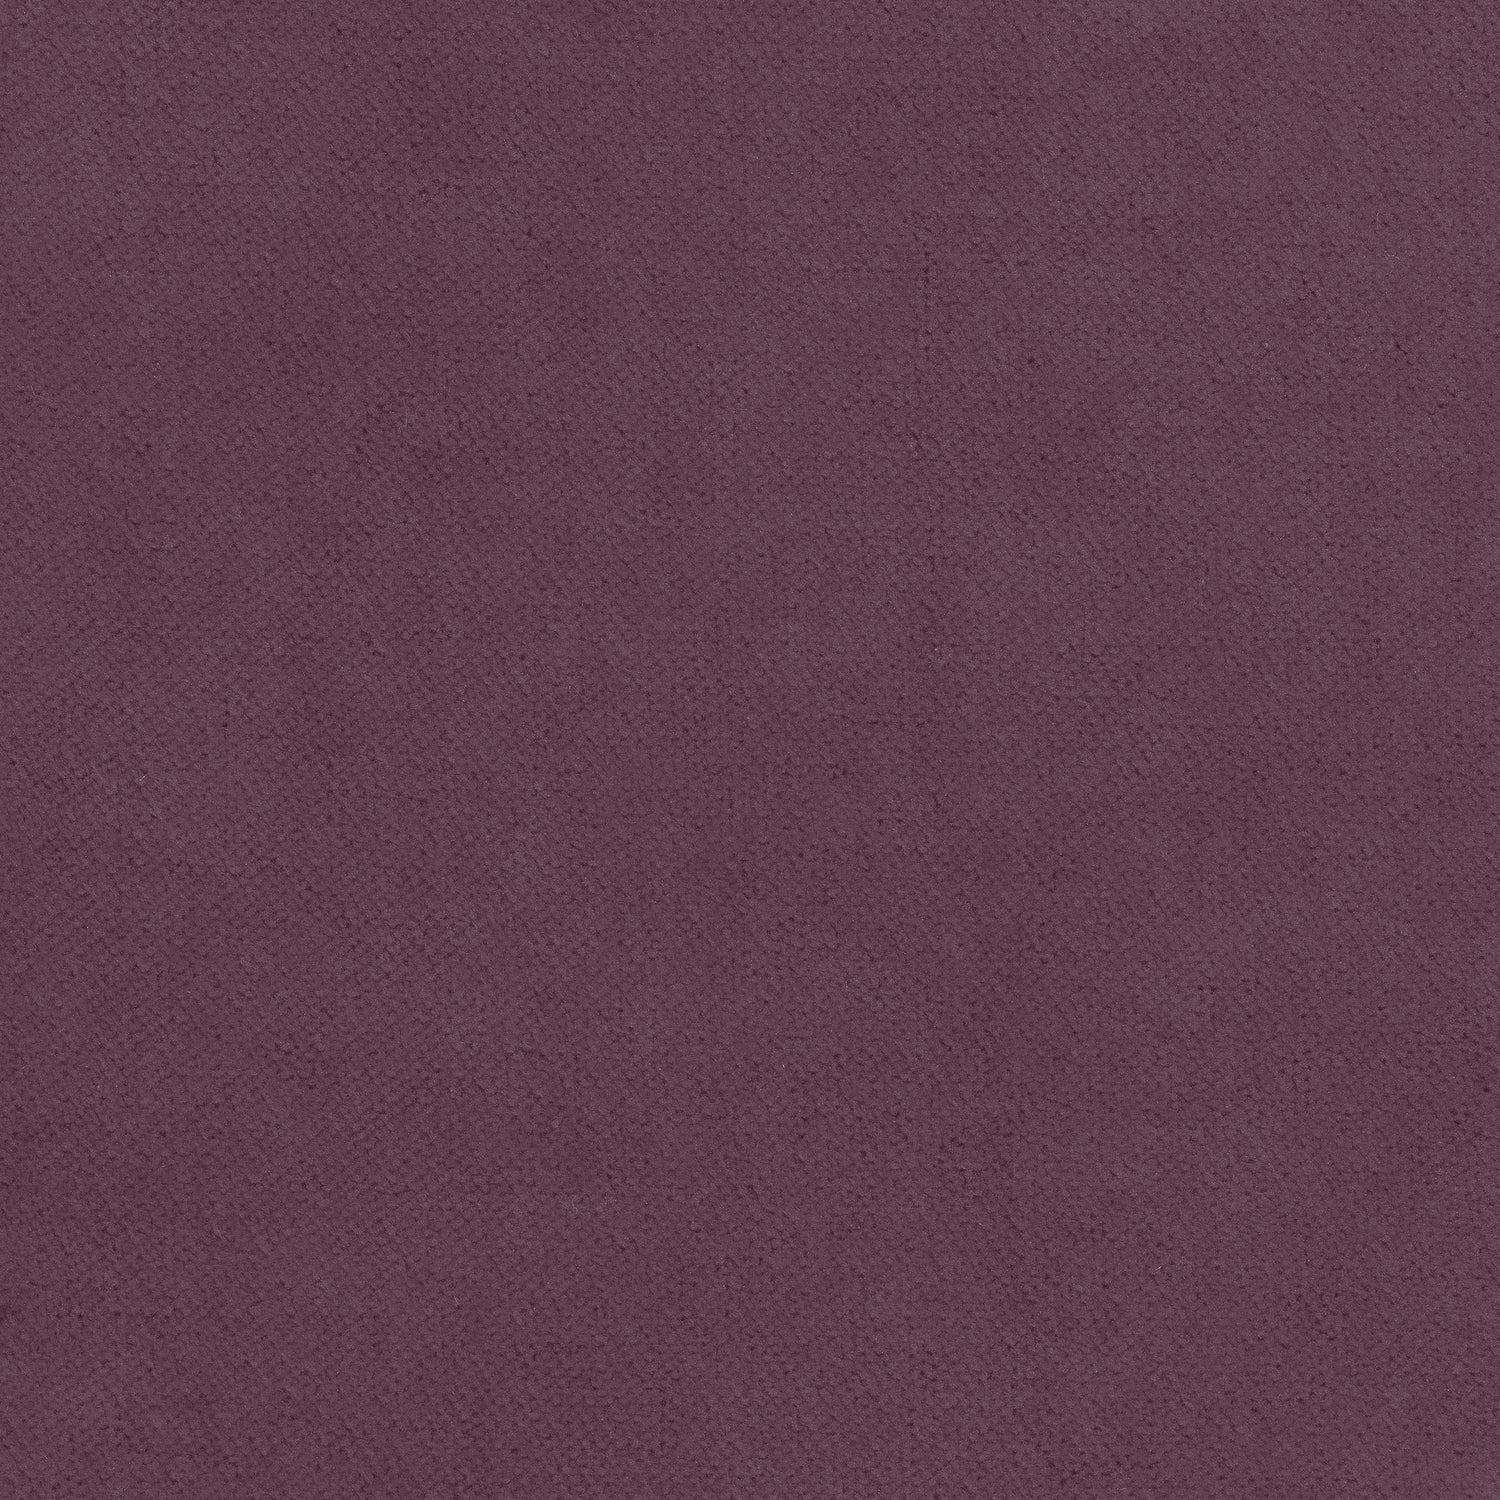 Club Velvet fabric in mulberry color - pattern number W7213 - by Thibaut in the Club Velvet collection